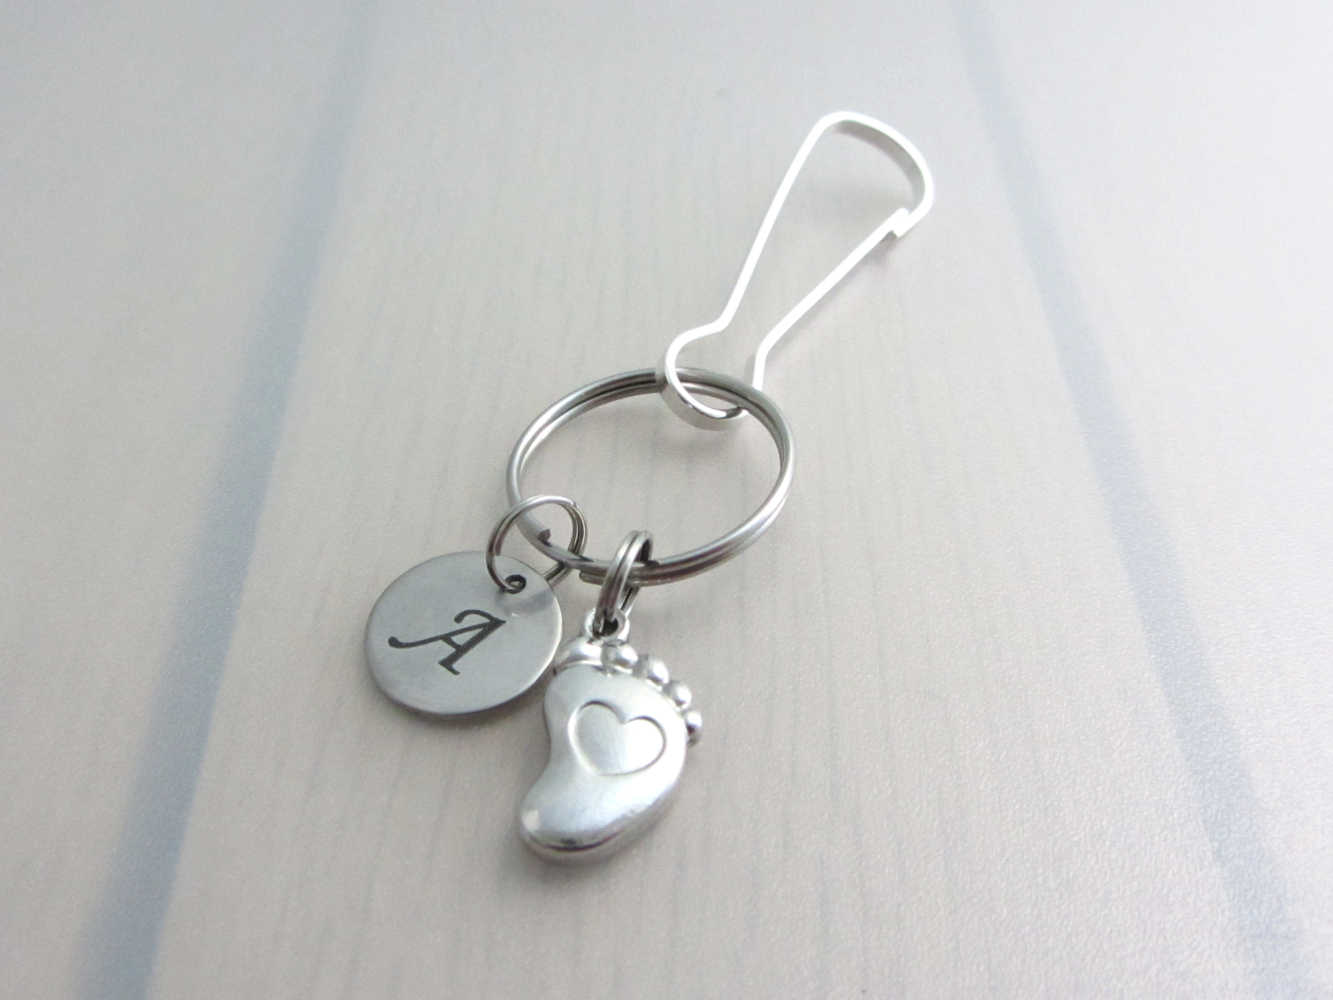 stainless steel laser engraved capital initial letter disc charm and a single foot charm with indented heart on a bag charm with snap clip hook